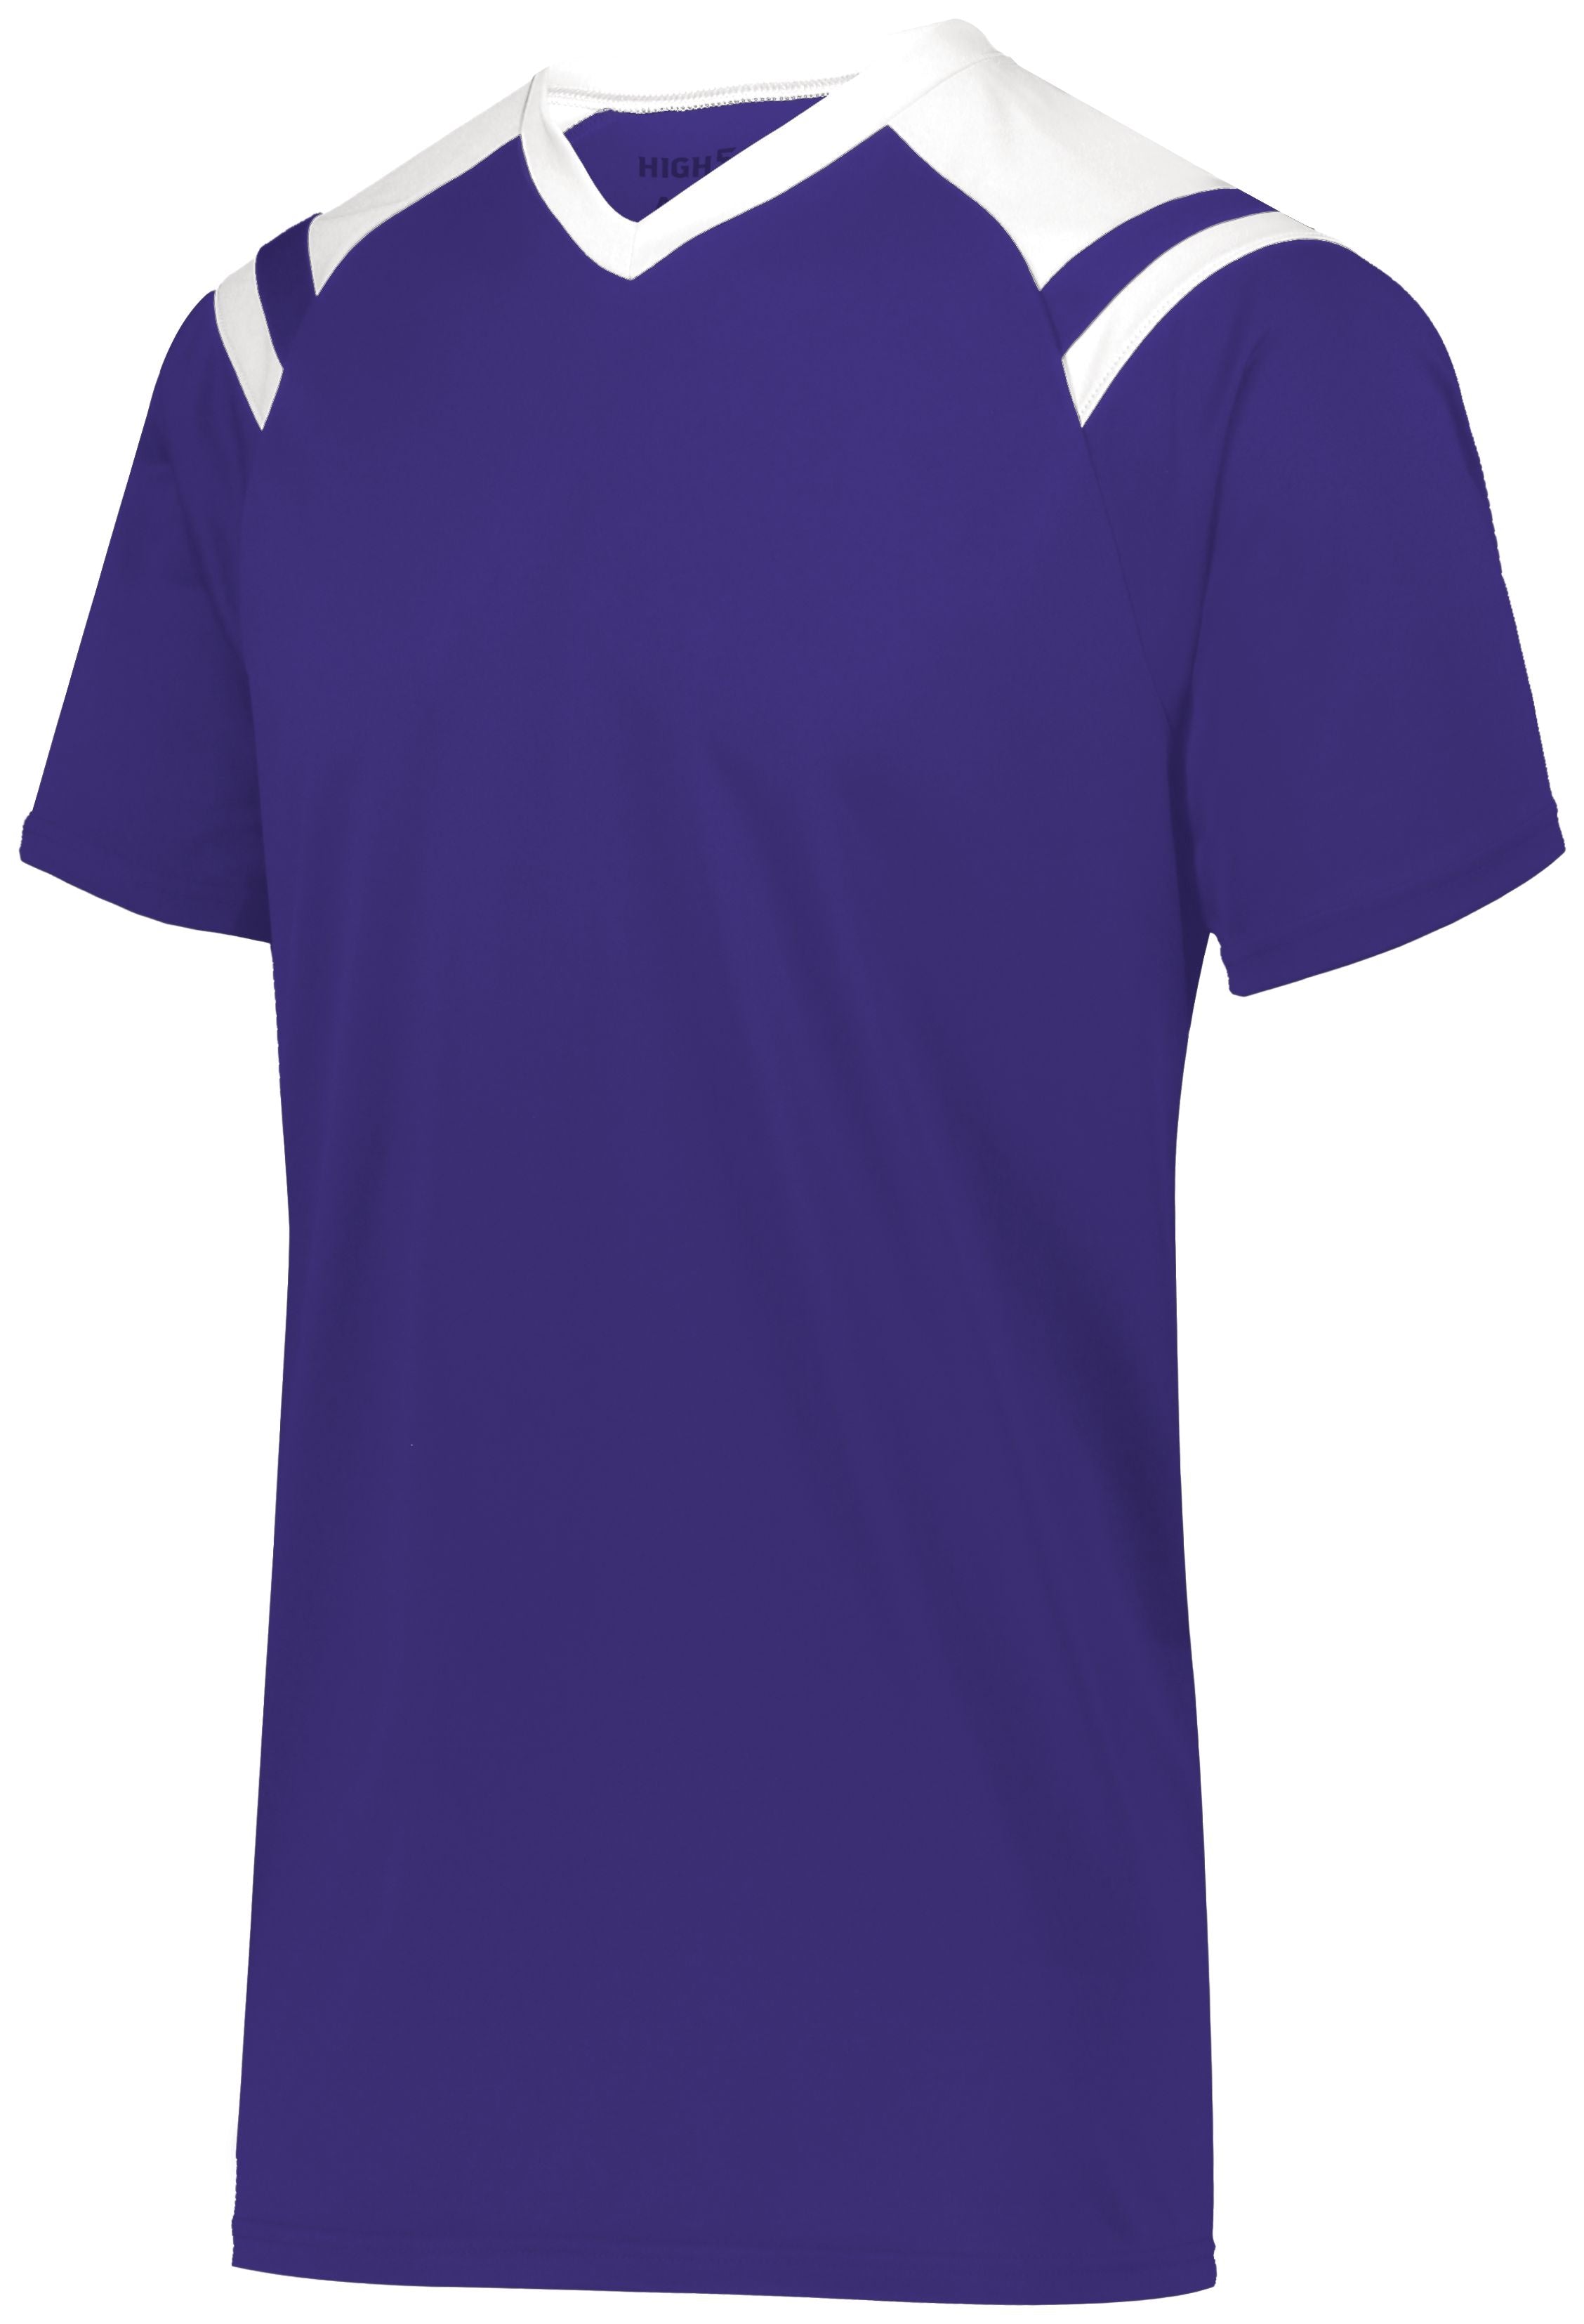 High 5 Sheffield Jersey in Purple/White  -Part of the Adult, Adult-Jersey, High5-Products, Soccer, Shirts, All-Sports-1, Sheffield-Soccer-Jerseys product lines at KanaleyCreations.com